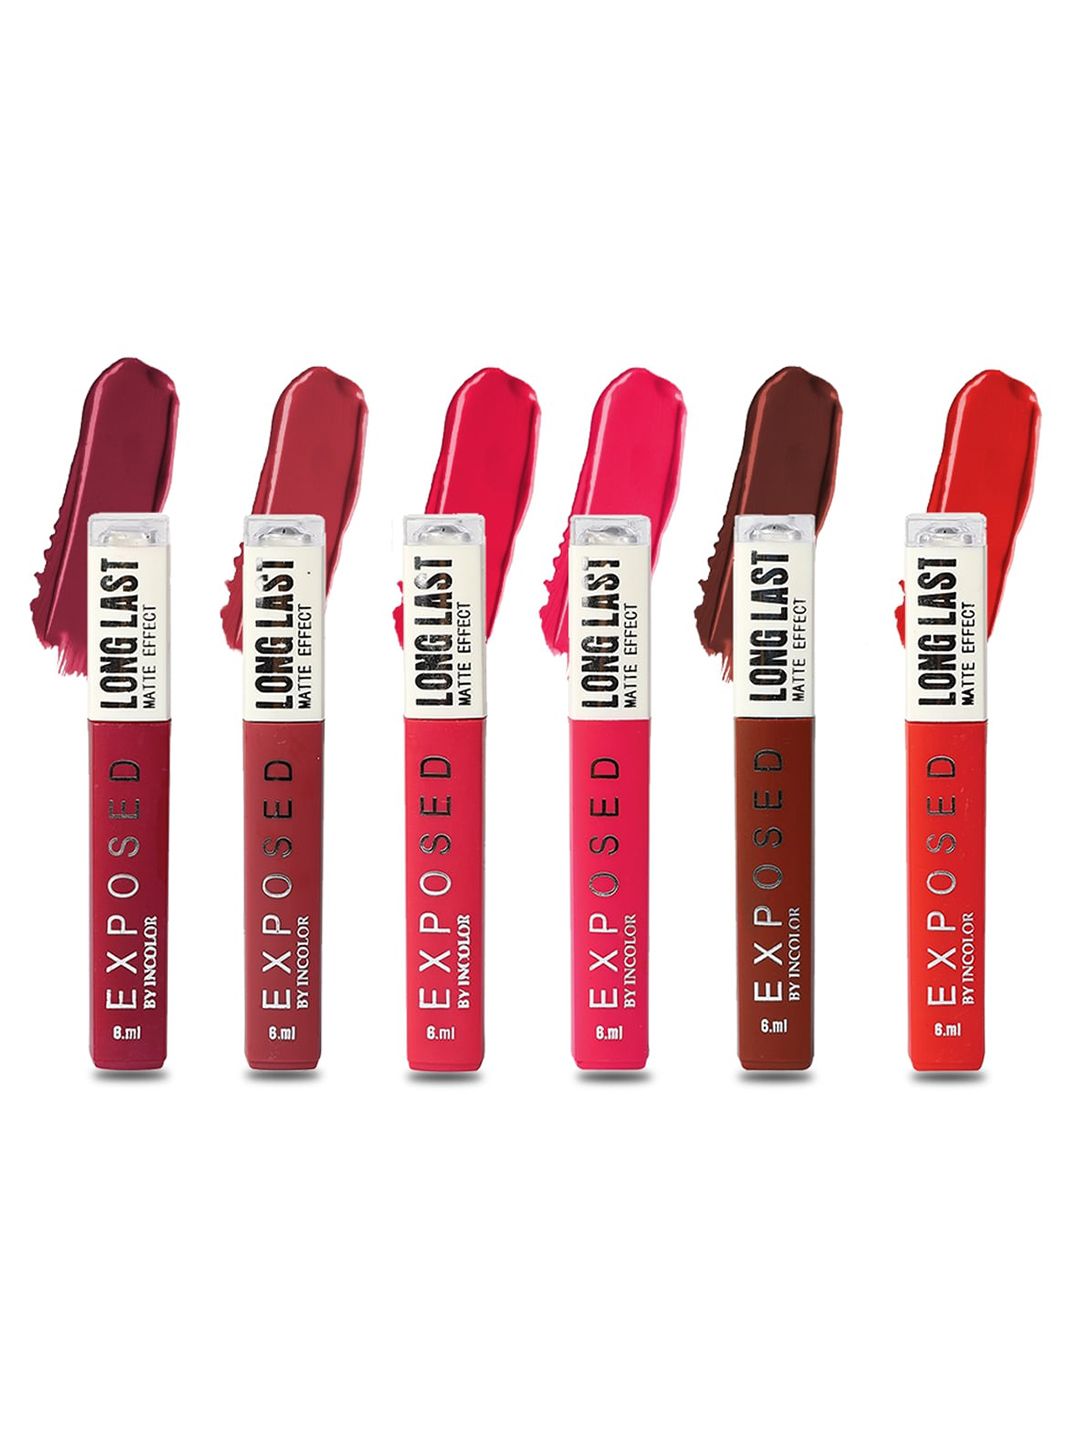 INCOLOR Set of 6 Exposed Long Last Matte Effect Lip Gloss 6 ml Each - Combo 04 Price in India